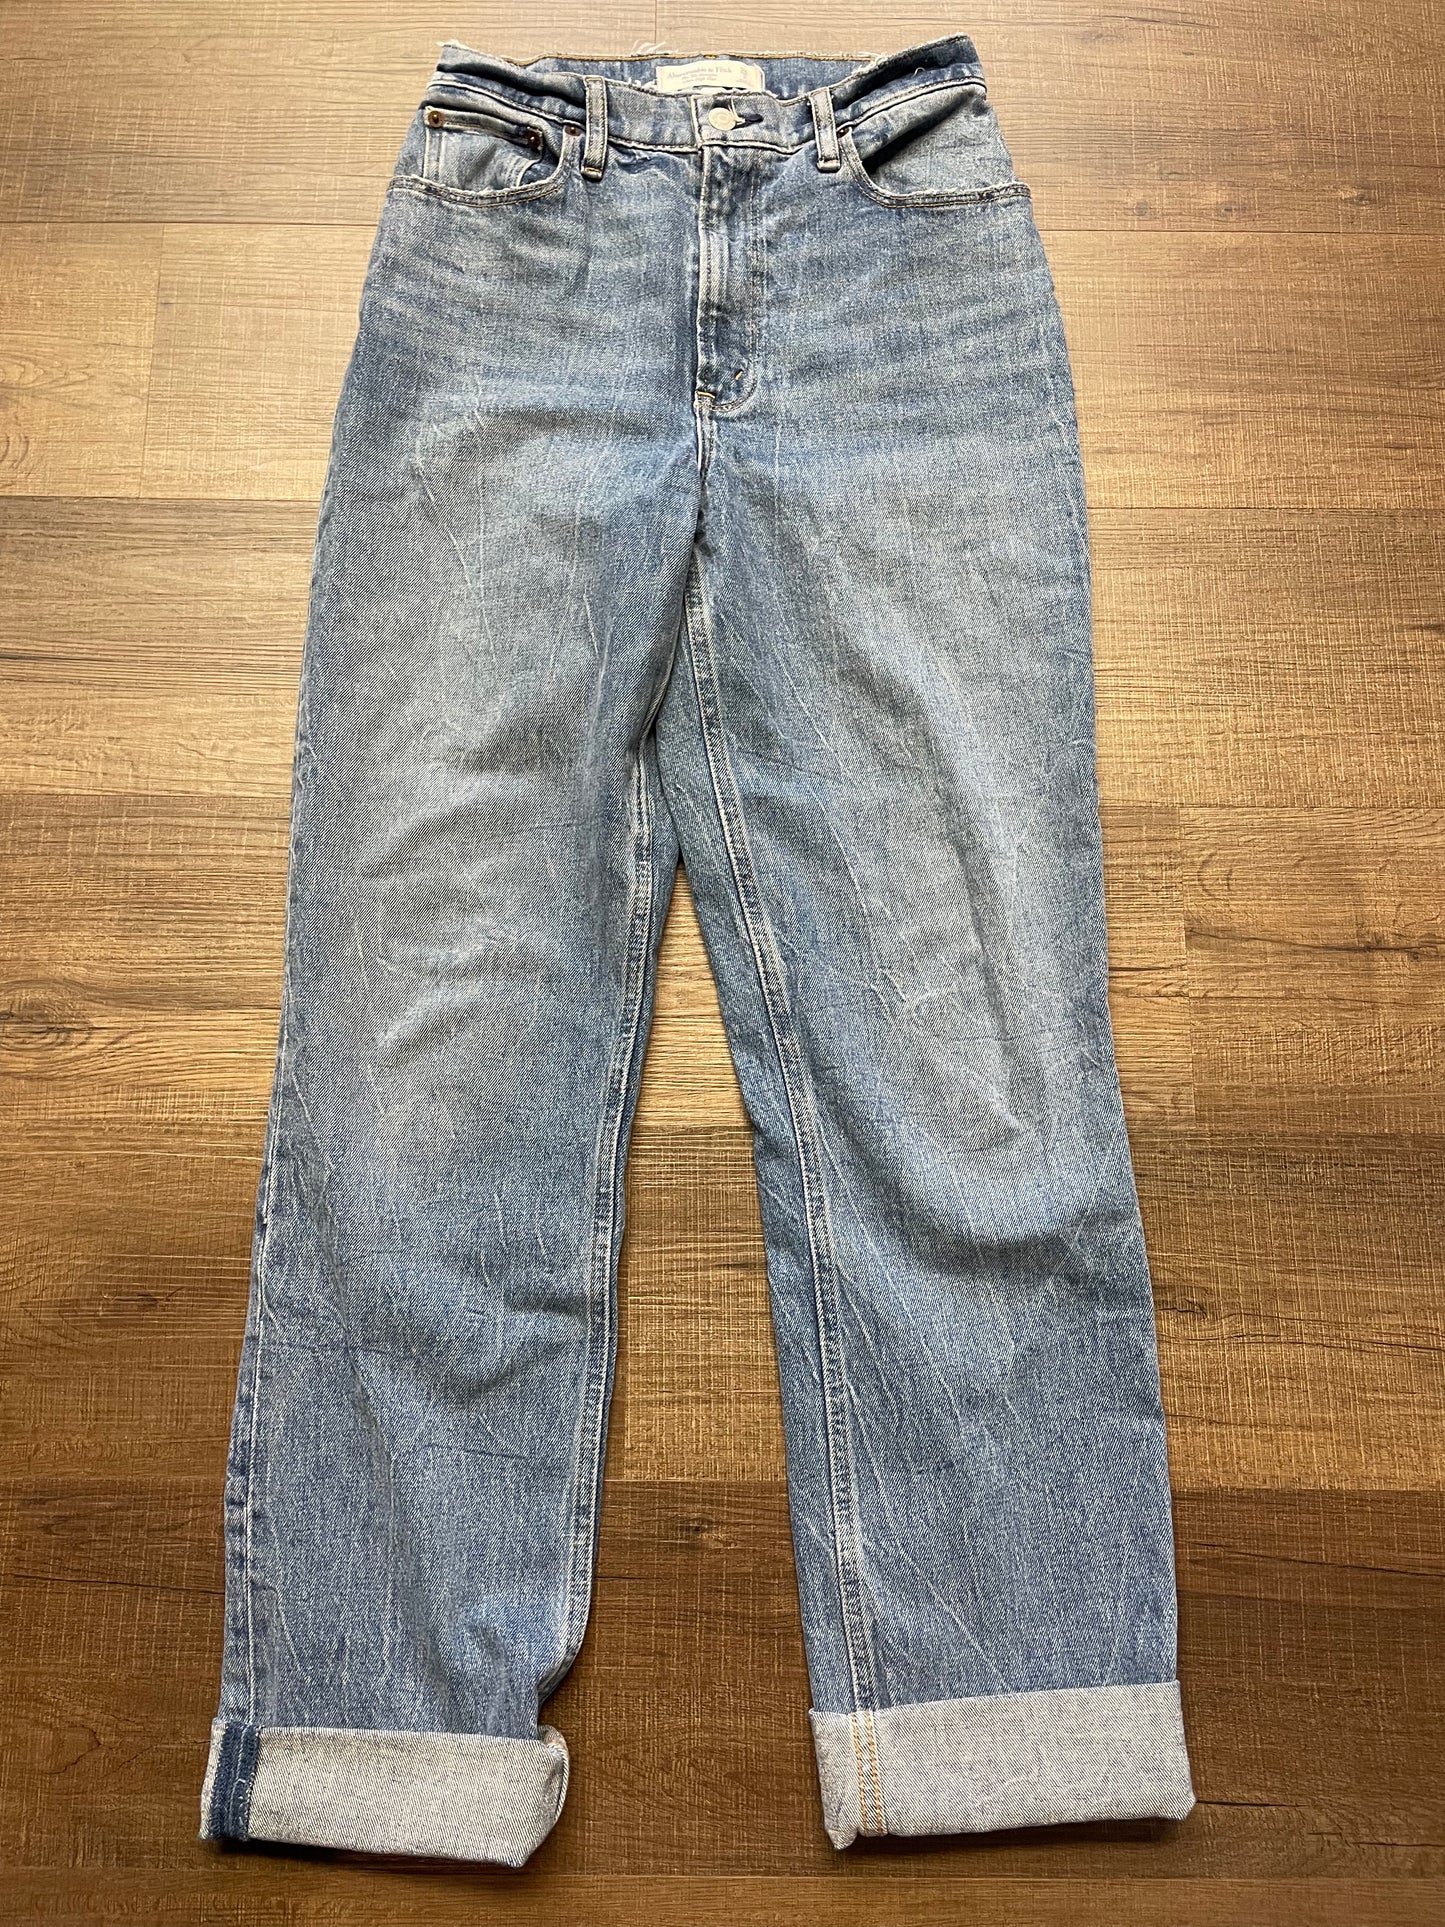 Abercrombie & Fitch The 90's Women's Jean (26L)